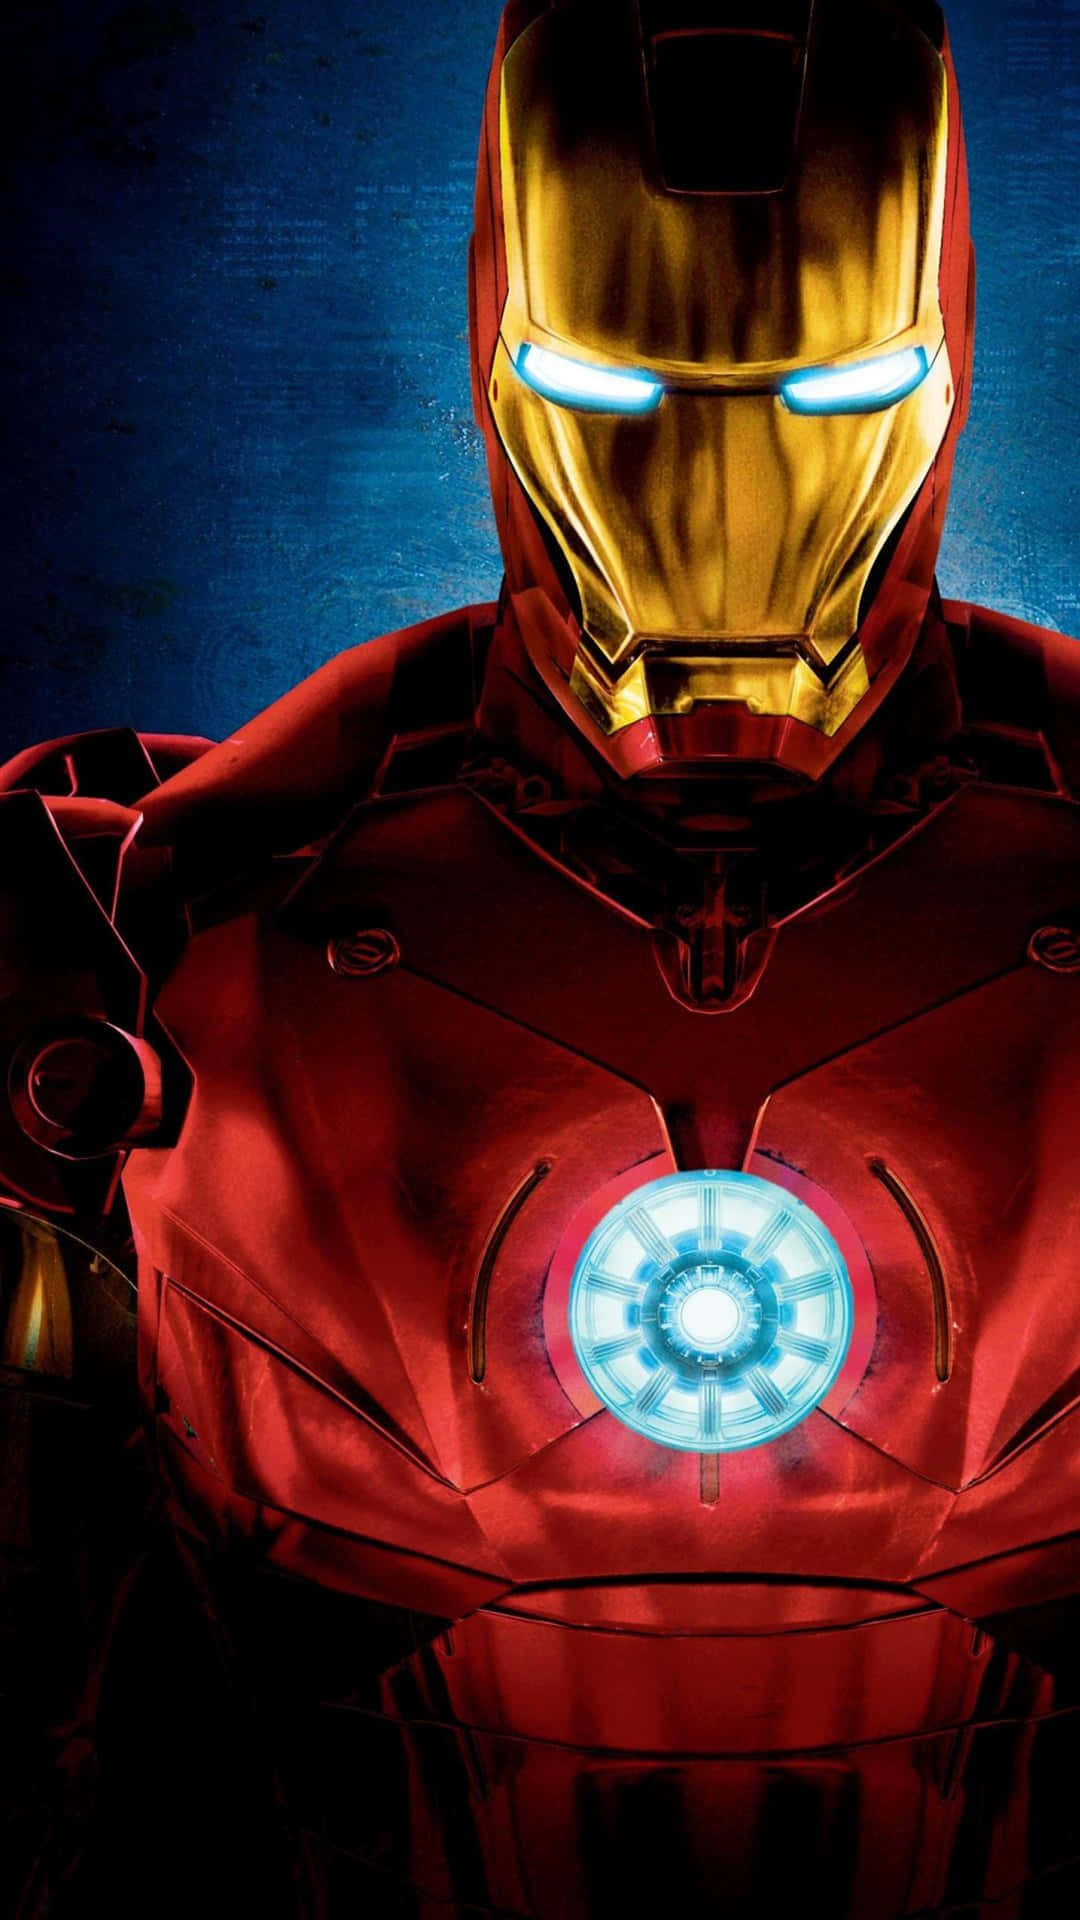 "Iron Man brings justice to the world with his superhuman power and intelligence" Wallpaper